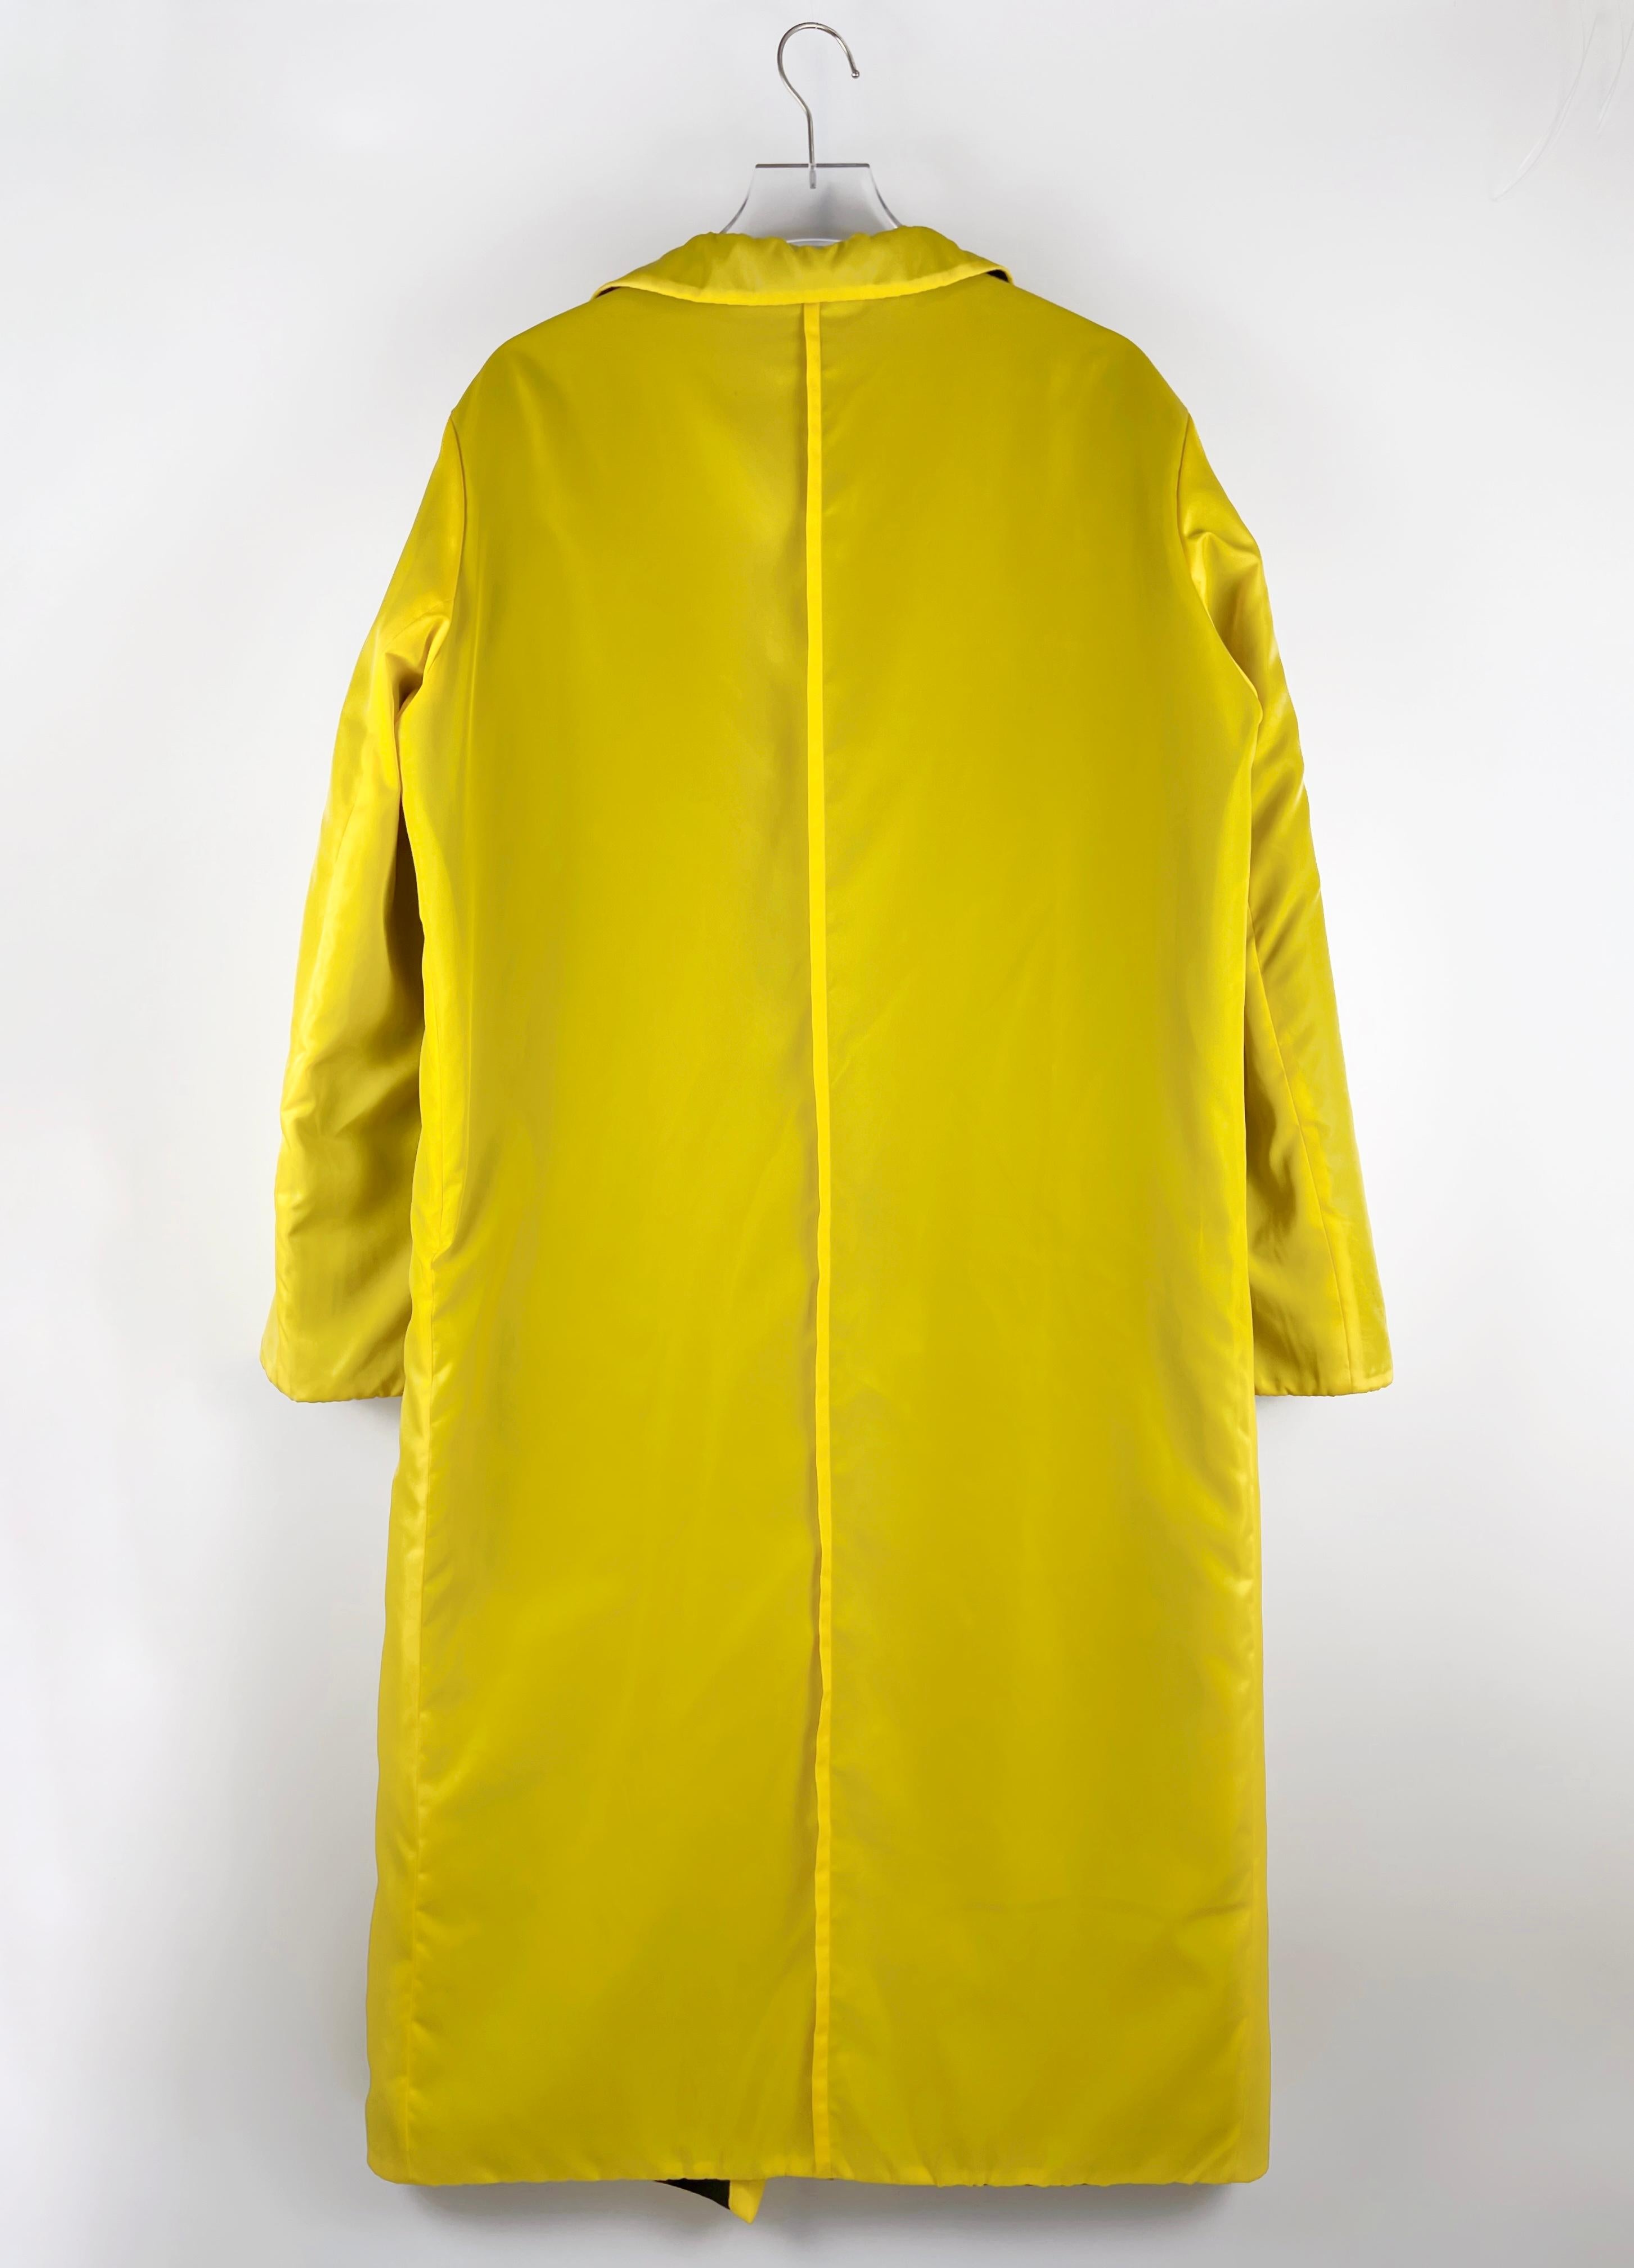 Y's Yellow Puffer Trench Coat In Excellent Condition For Sale In Tương Mai Ward, Hoang Mai District